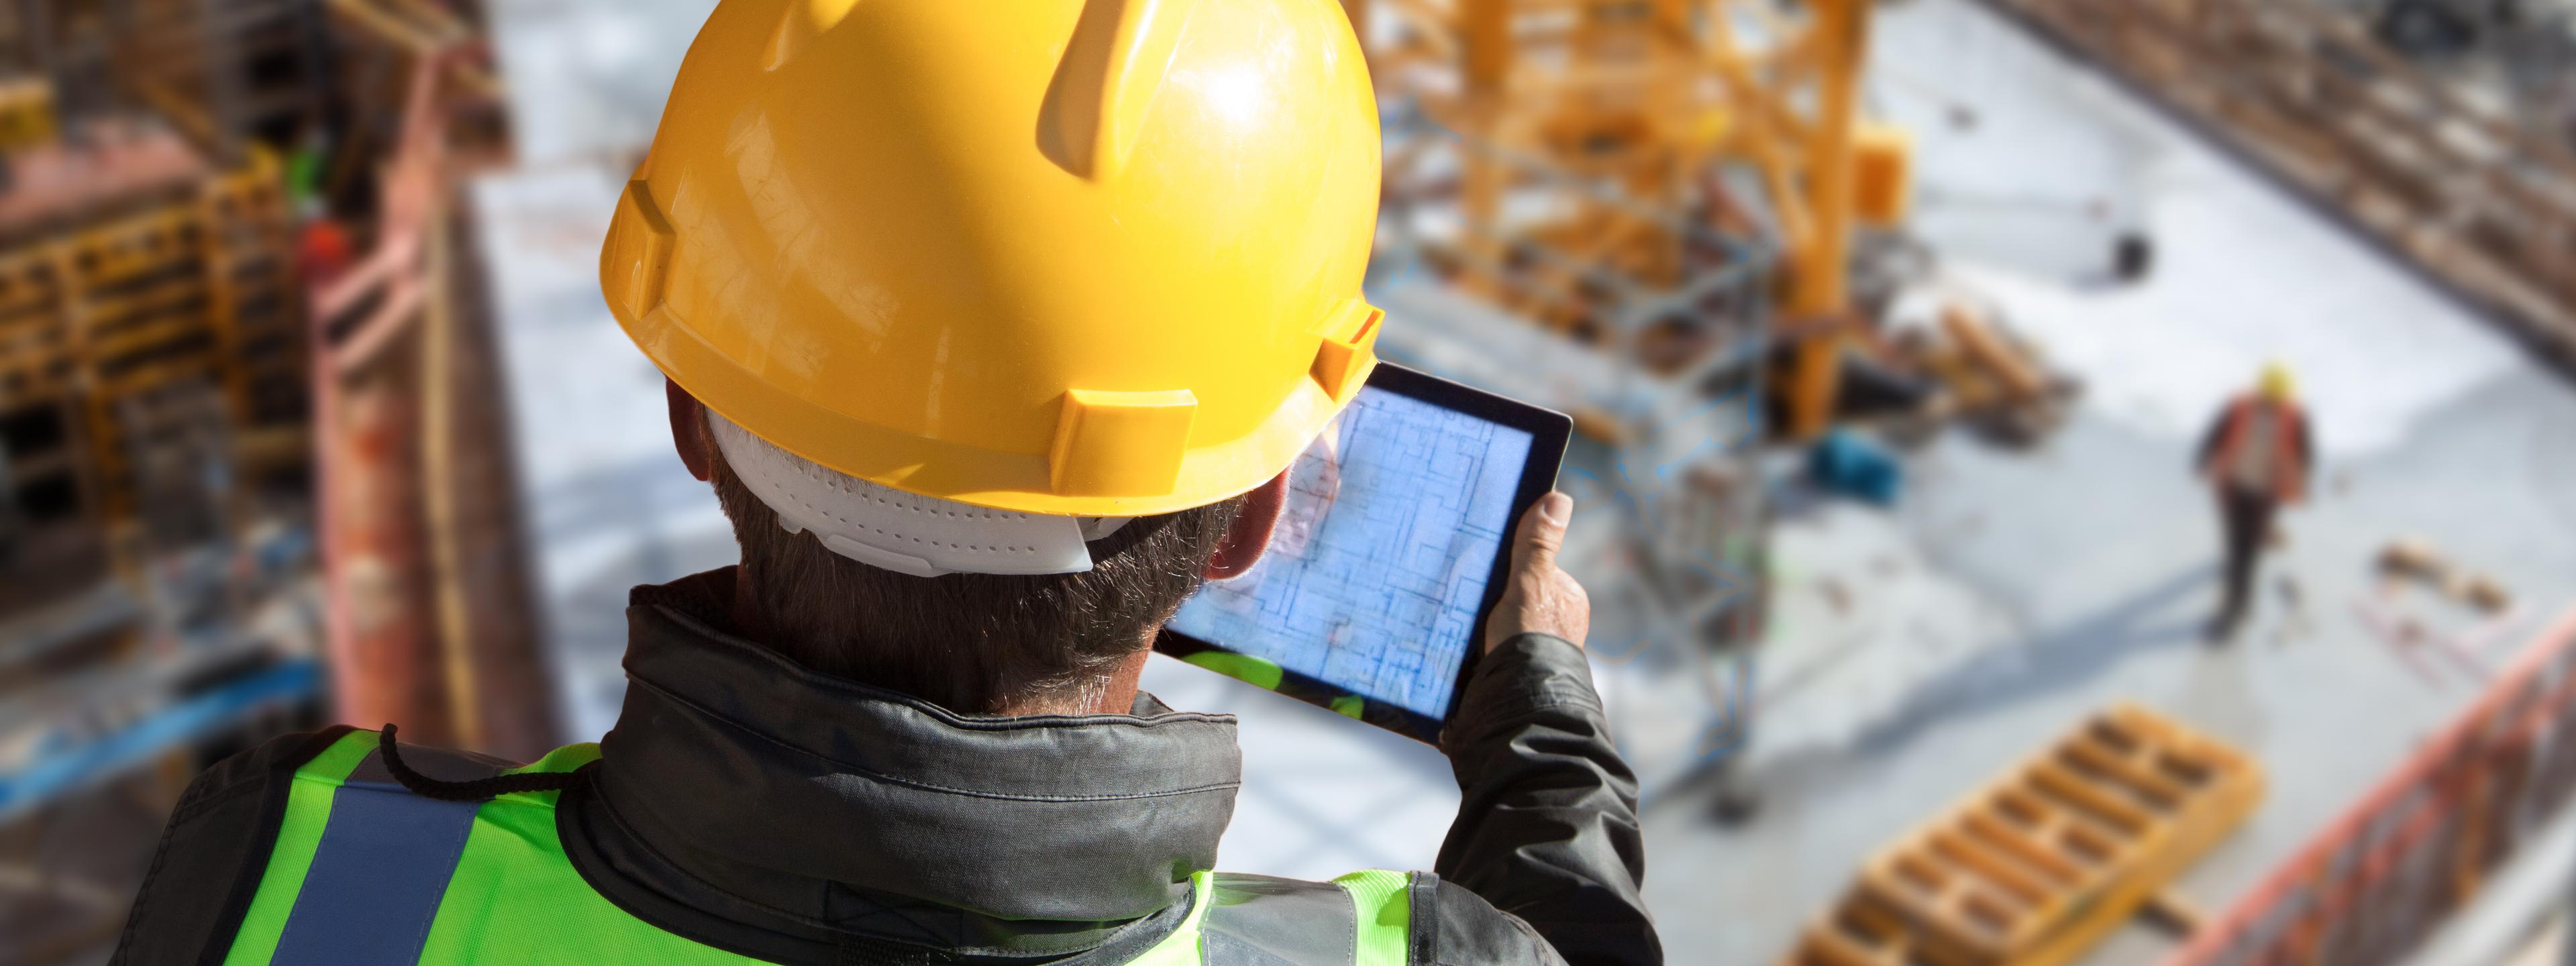 architect engineer construction worker with hard hat working on site with tablet computer